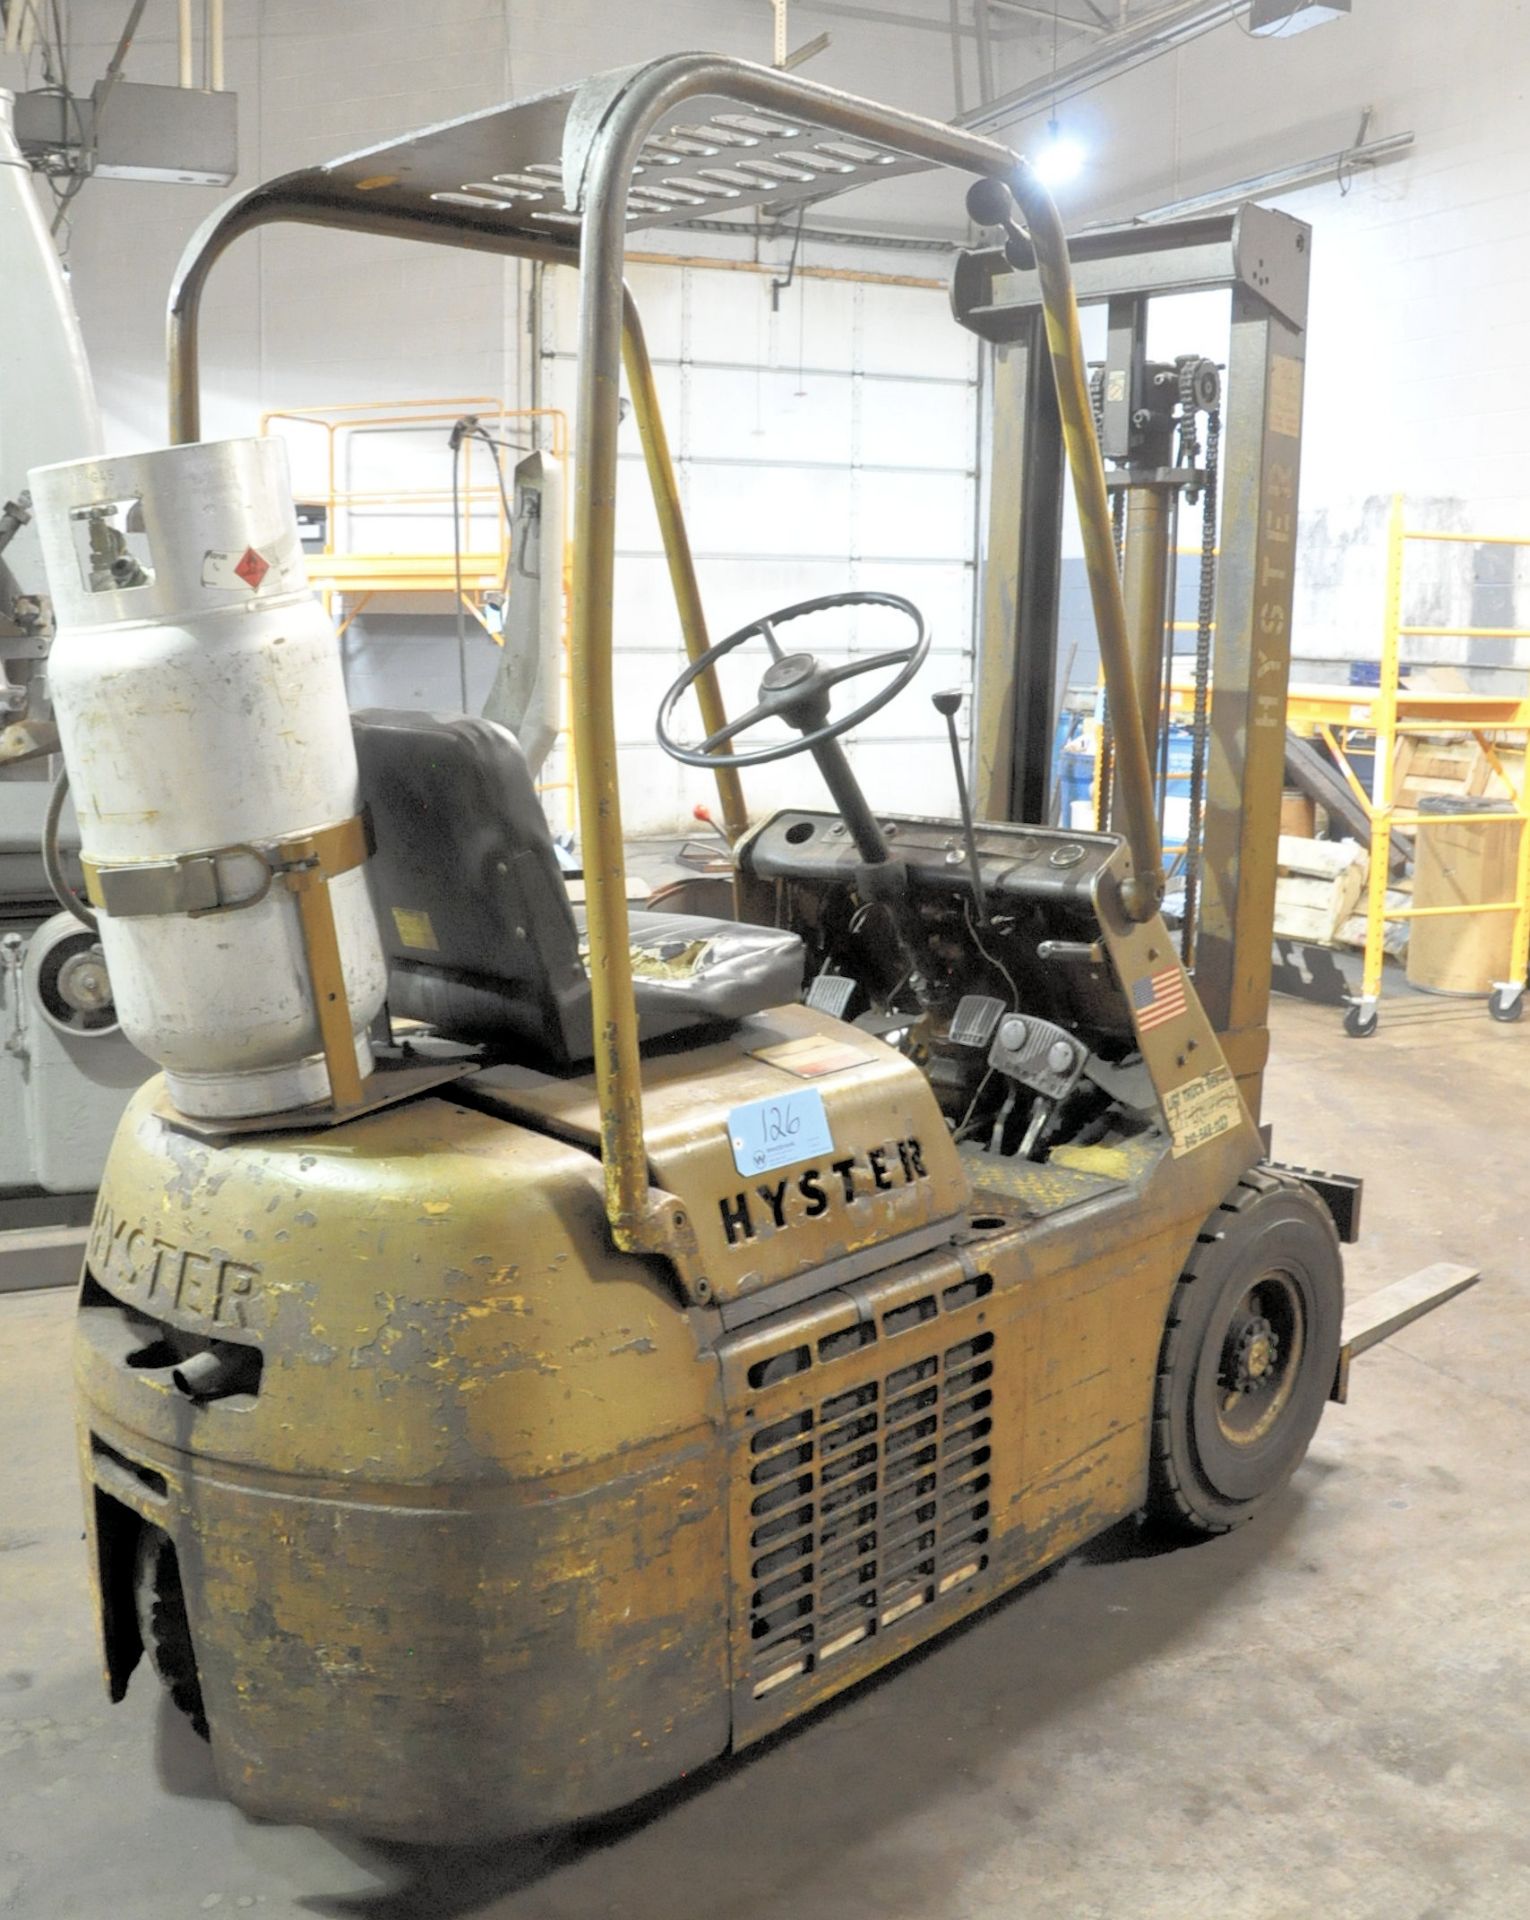 Hyster 3,350-LB Capacity 3-Wheel LP-Gas Forklift Truck - Image 3 of 6